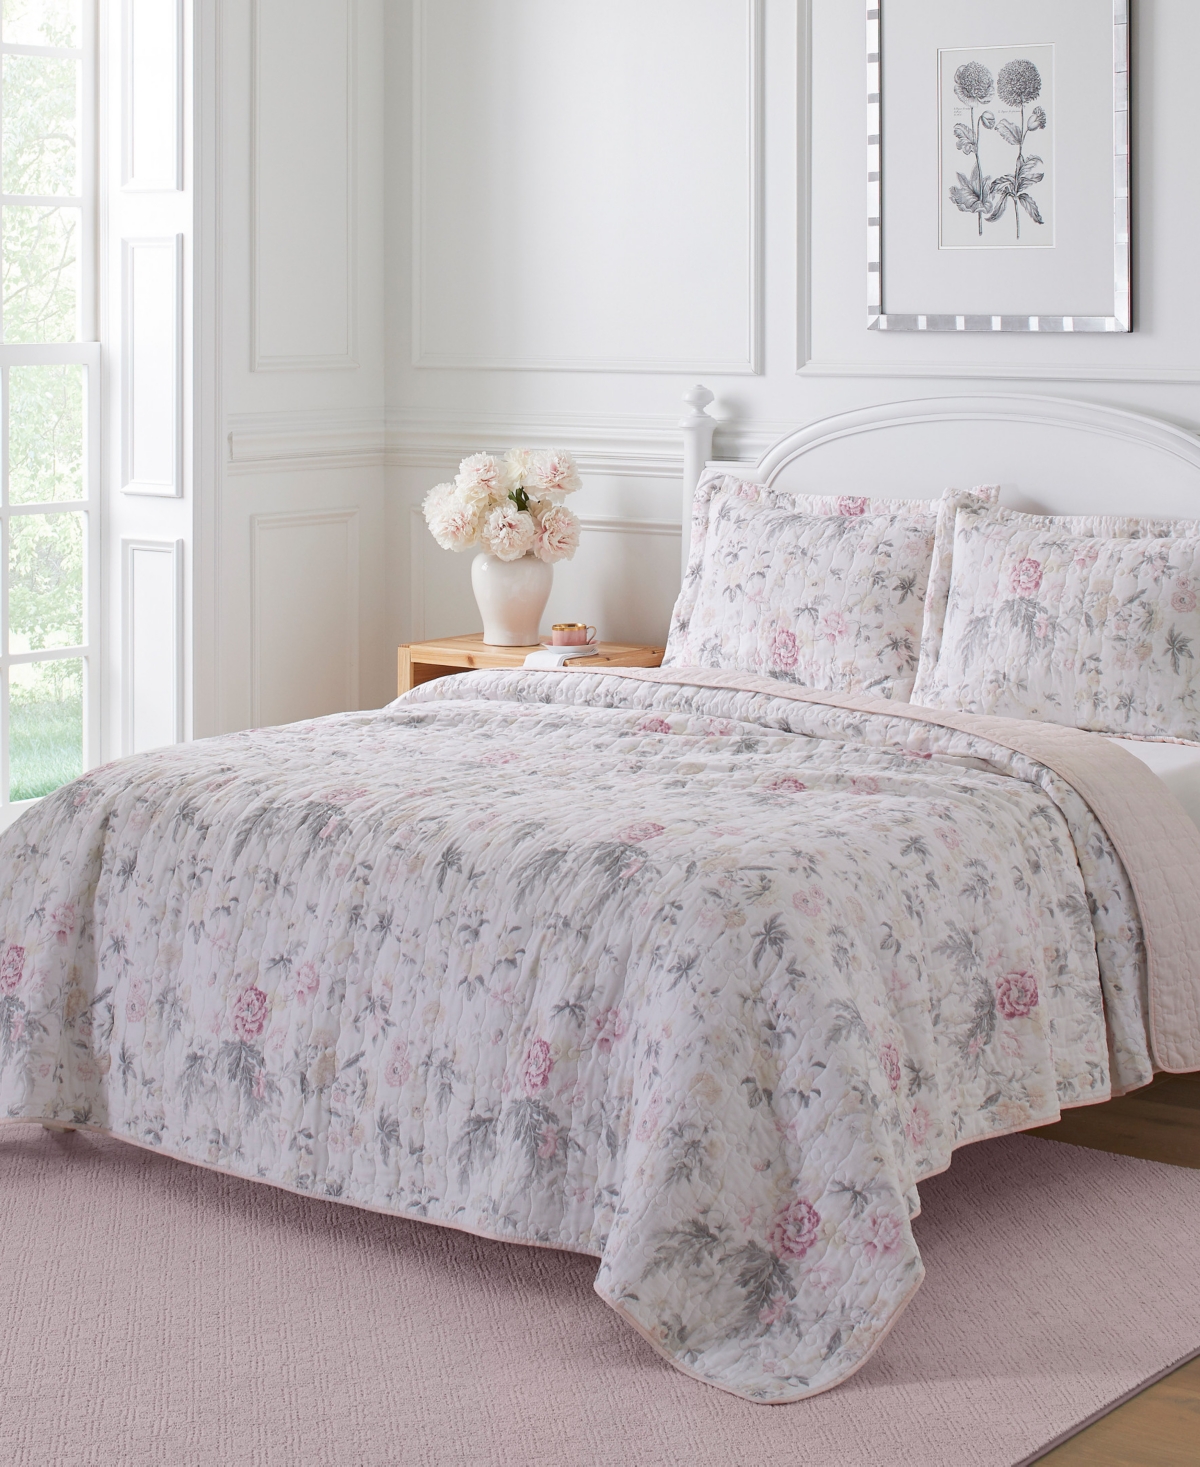 Laura Ashley Breezy Floral Reversible 2 Piece Quilt Set, Twin In Pastel Grey